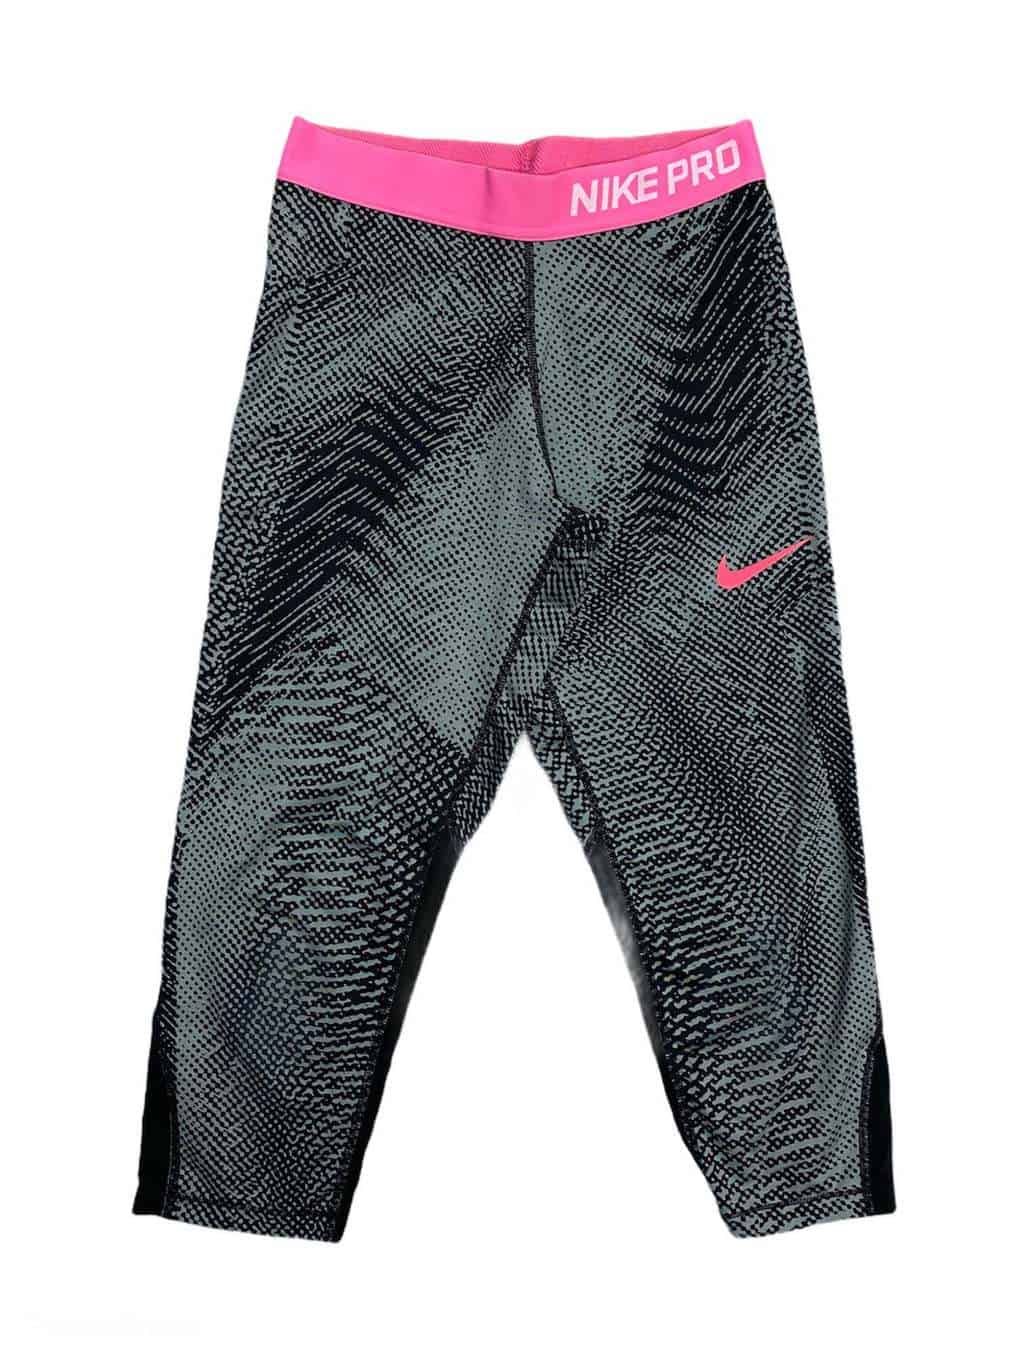 Nike Pro Leggings With Pink Waistband